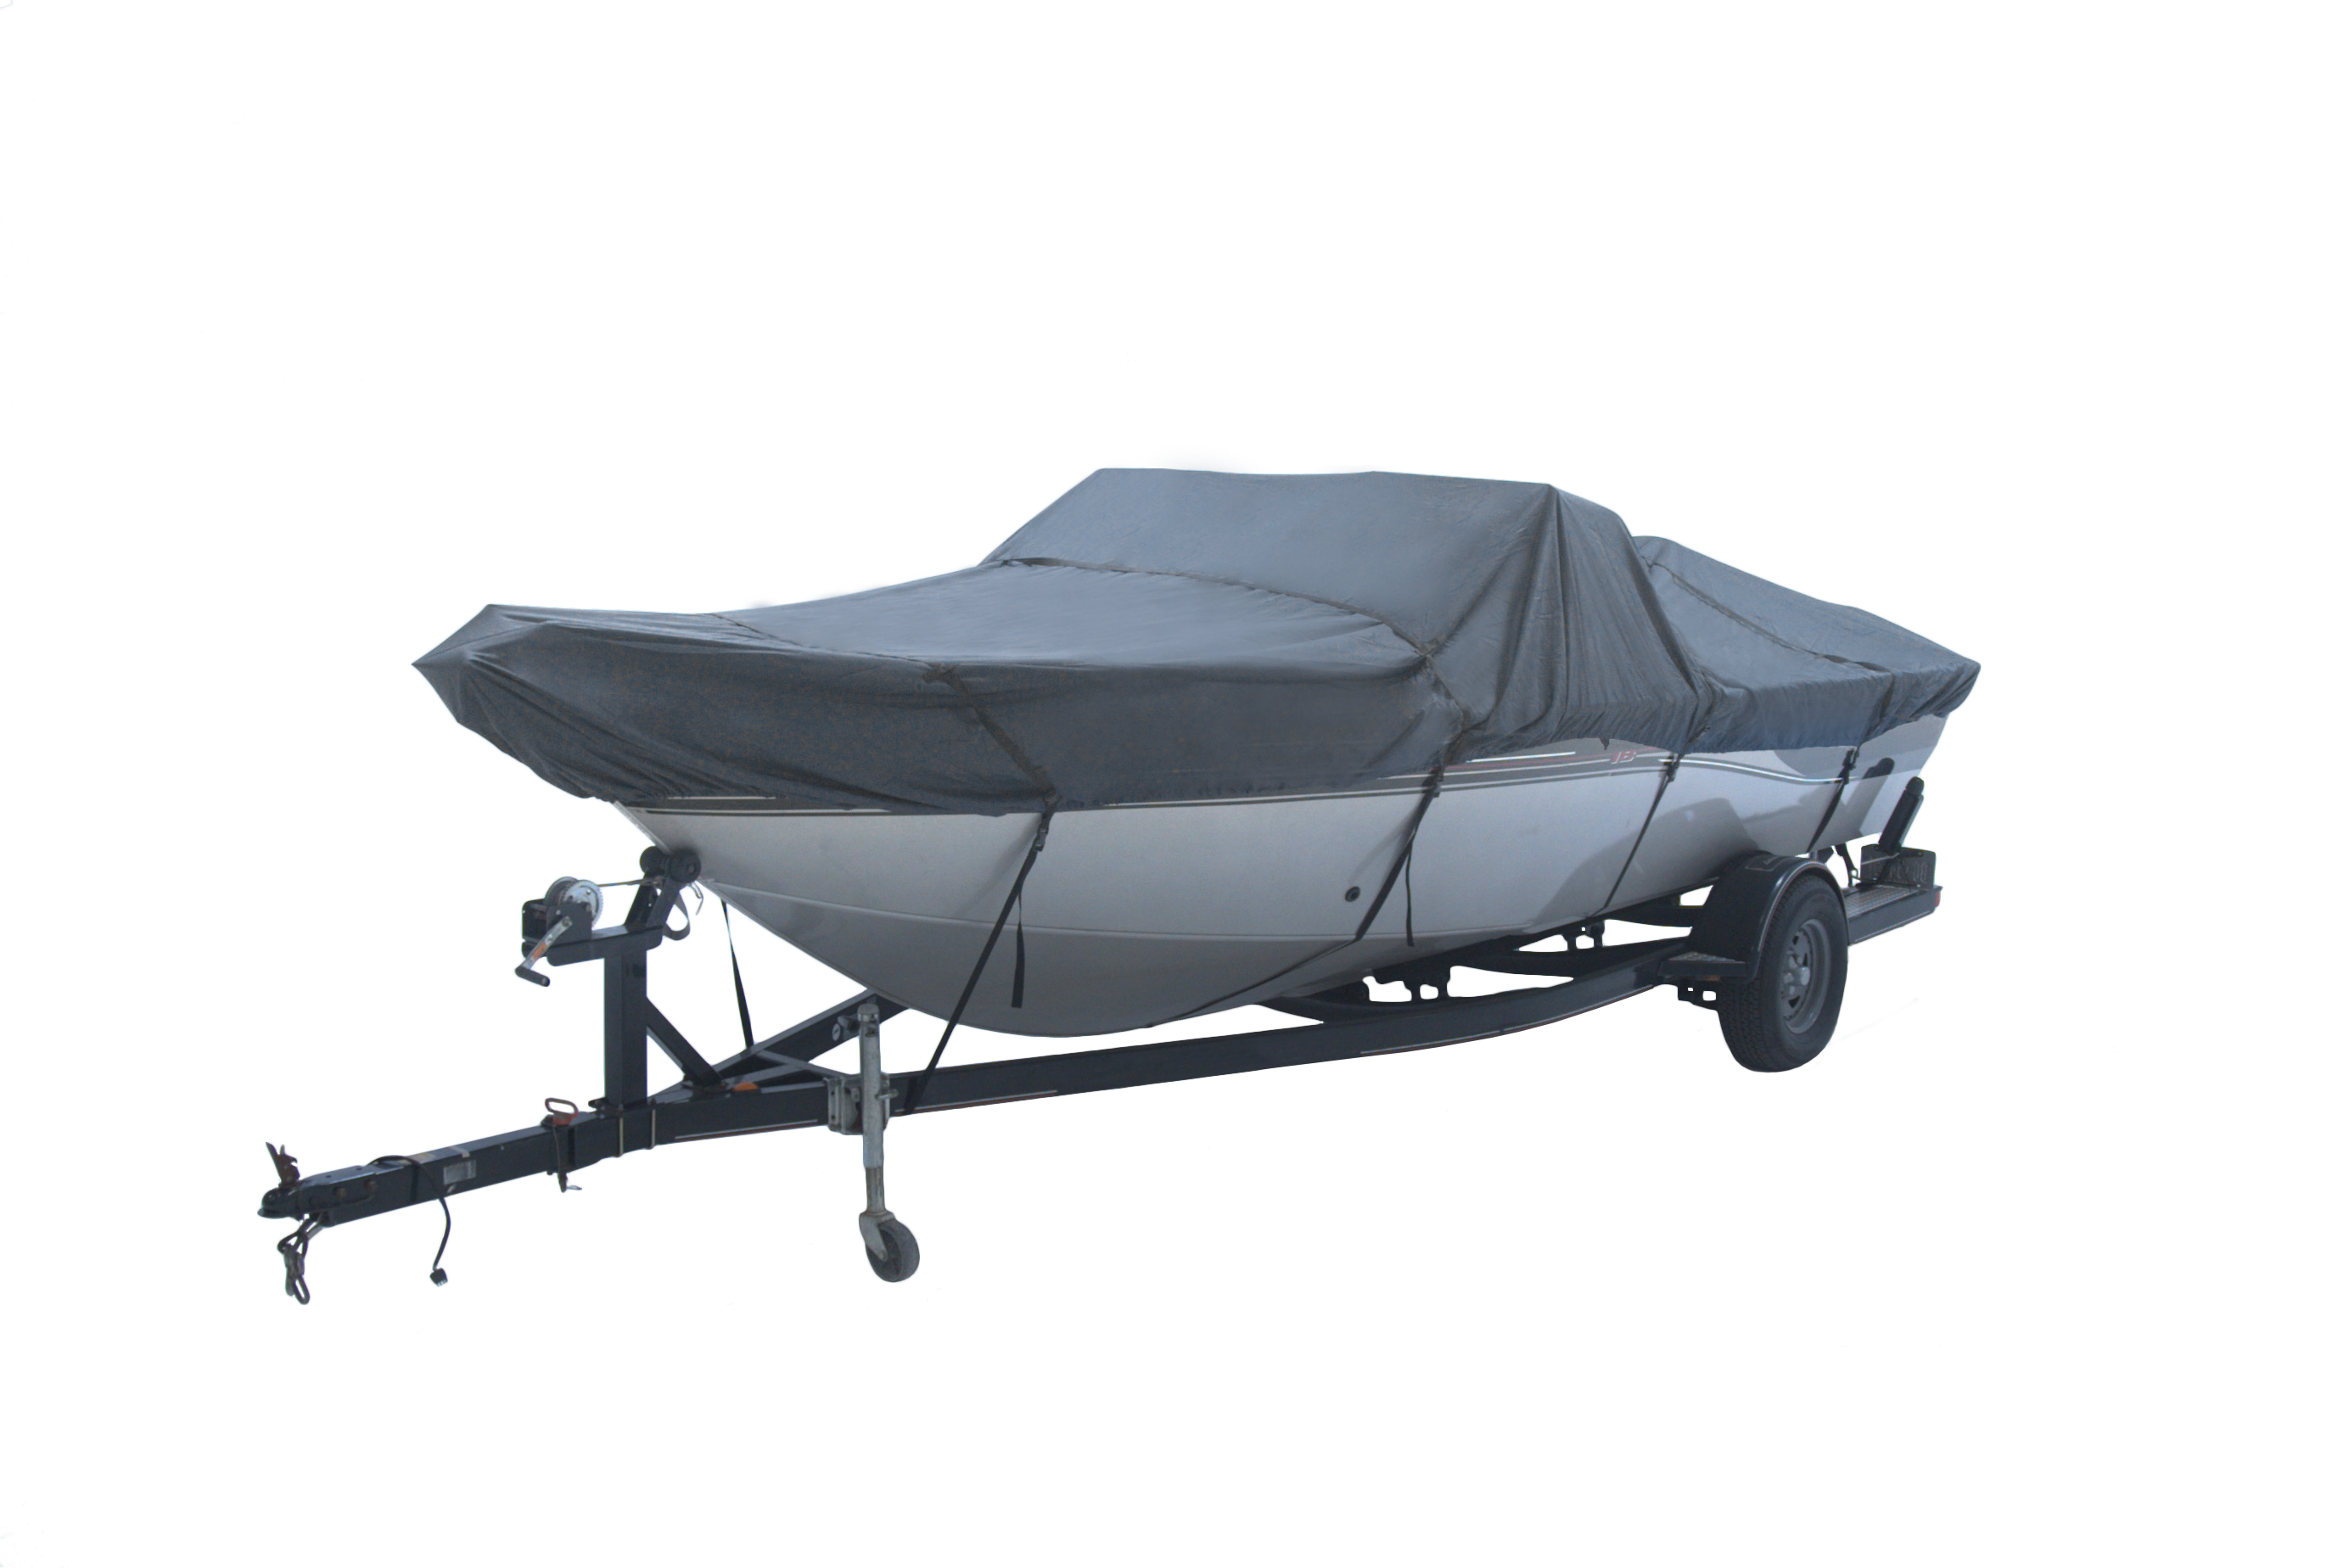 Seal Skin Trailerable Boat Cover- 22'-24' Fits V-Hull,Bass Boat,Runabout,Fishing  Boat,Pro-Style,FishSki, Waterproof Heavy Duty Boat Cover w/ Storage Bag,  up to 22ft-24ft Long x 116